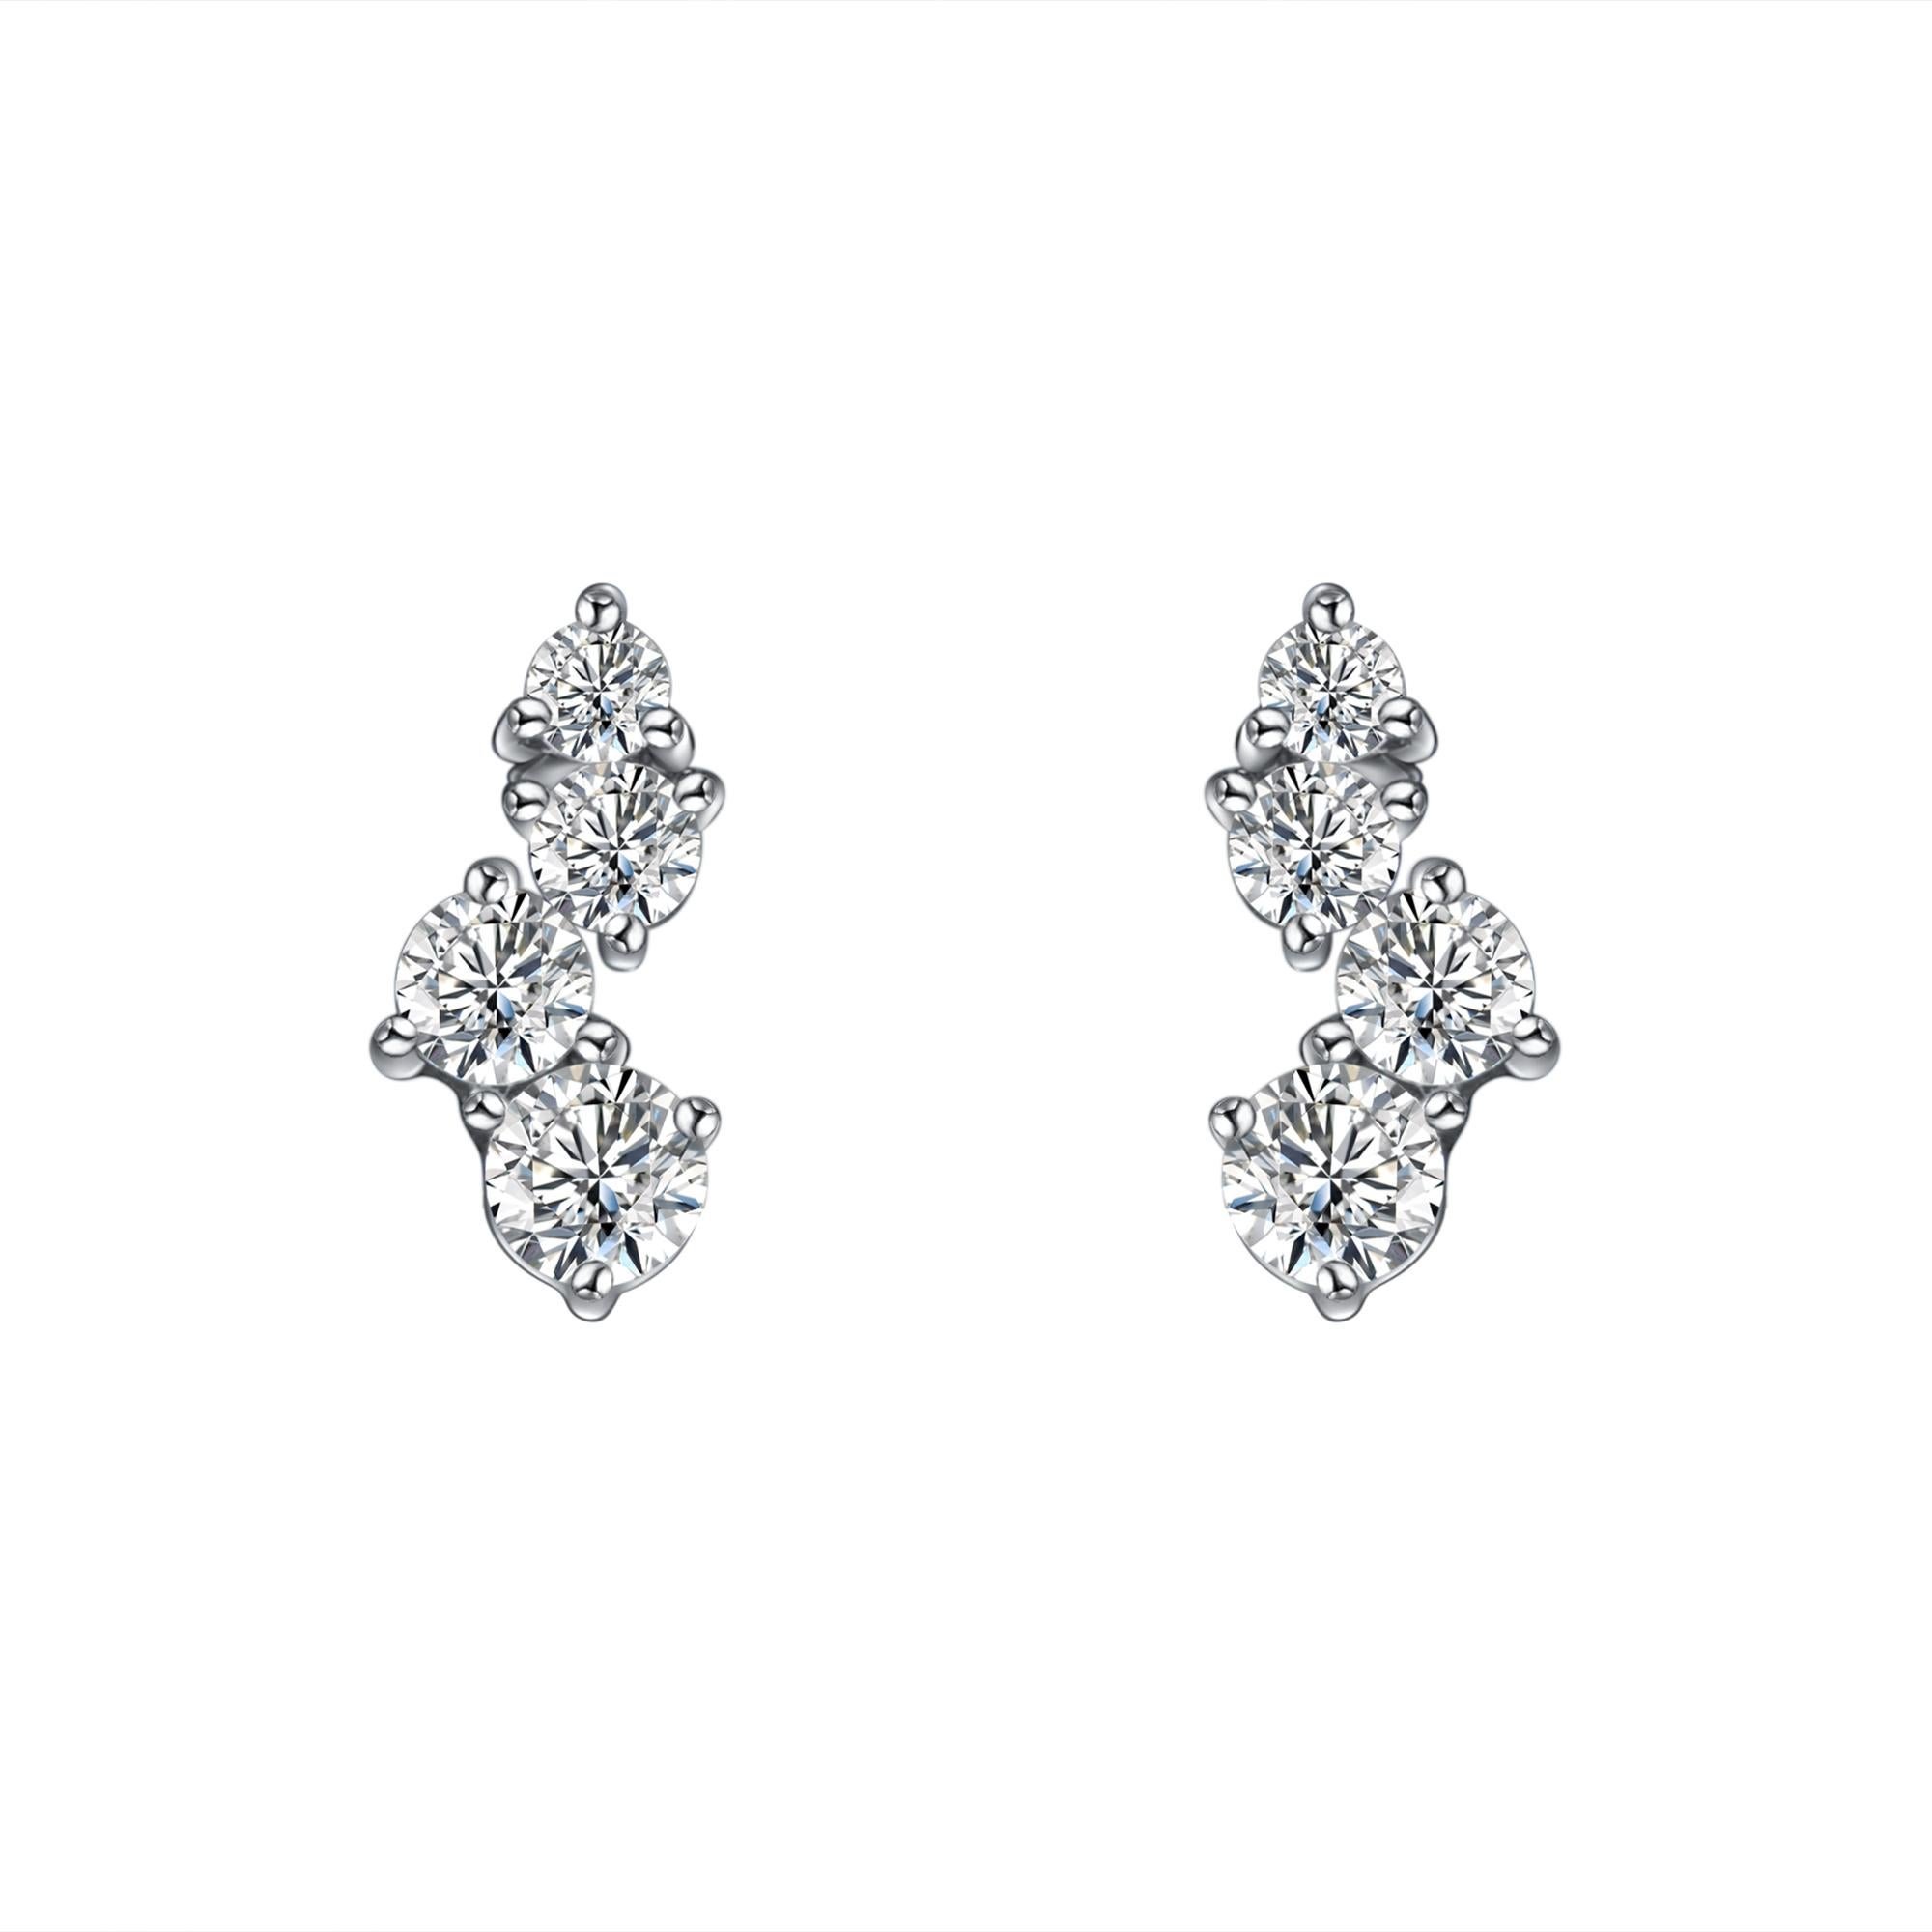 Hestia Bare Modern Diamond Cluster White Gold Stud Earrings In New Condition For Sale In Toronto, Ontario